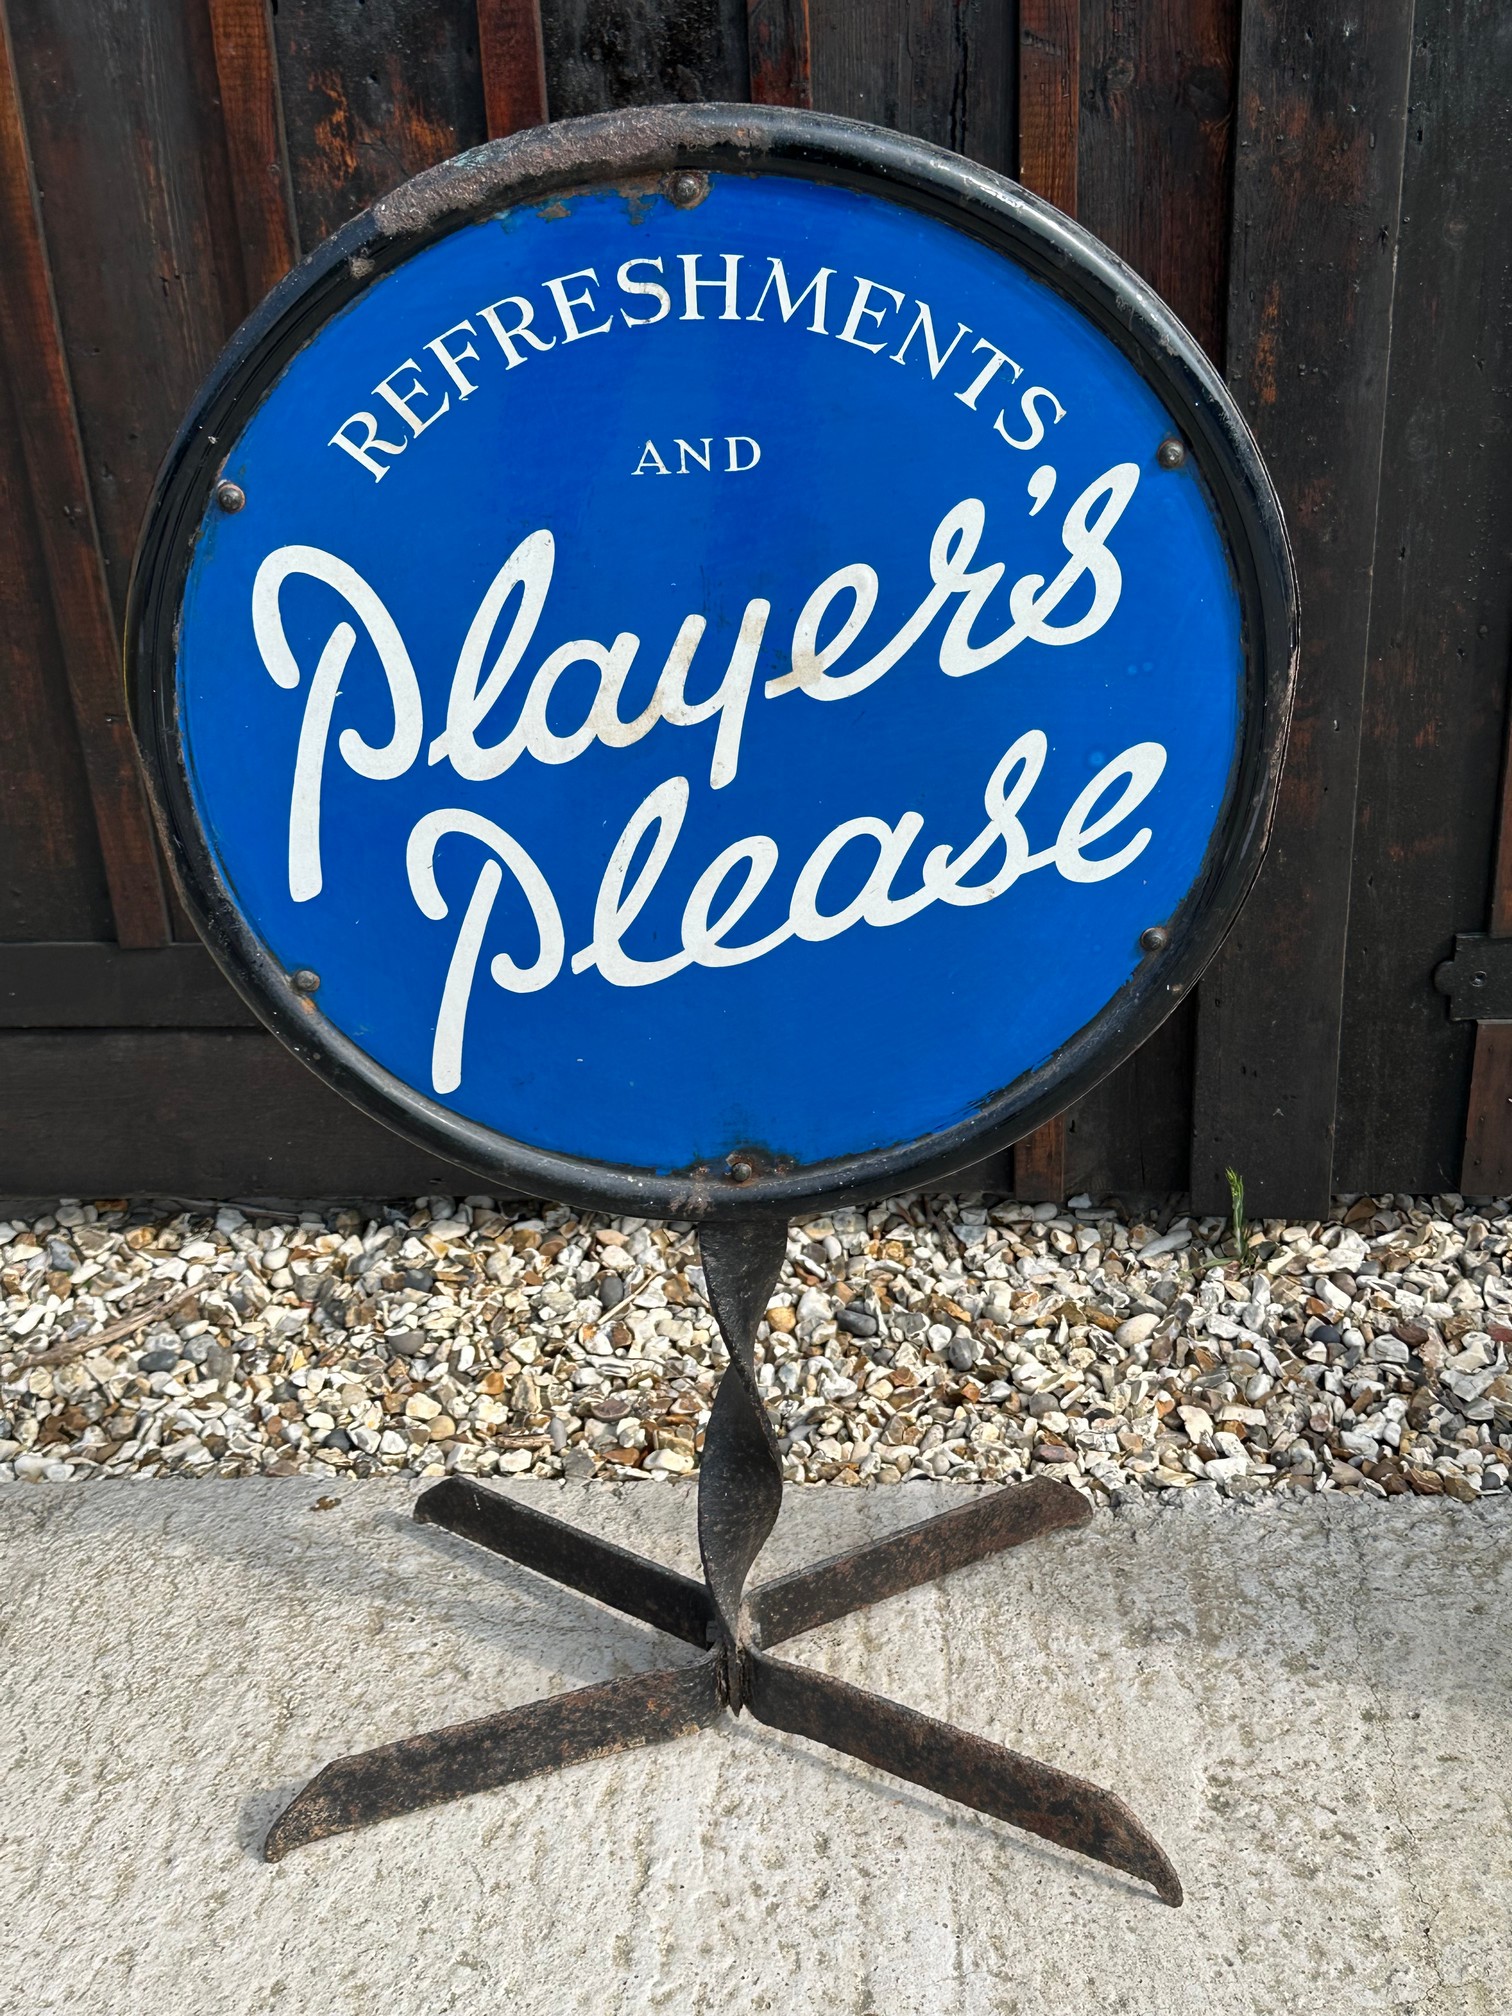 A double sided Player's Please (Cigarettes) Refreshments enamel advertising stand, 23 1/4 x 38".